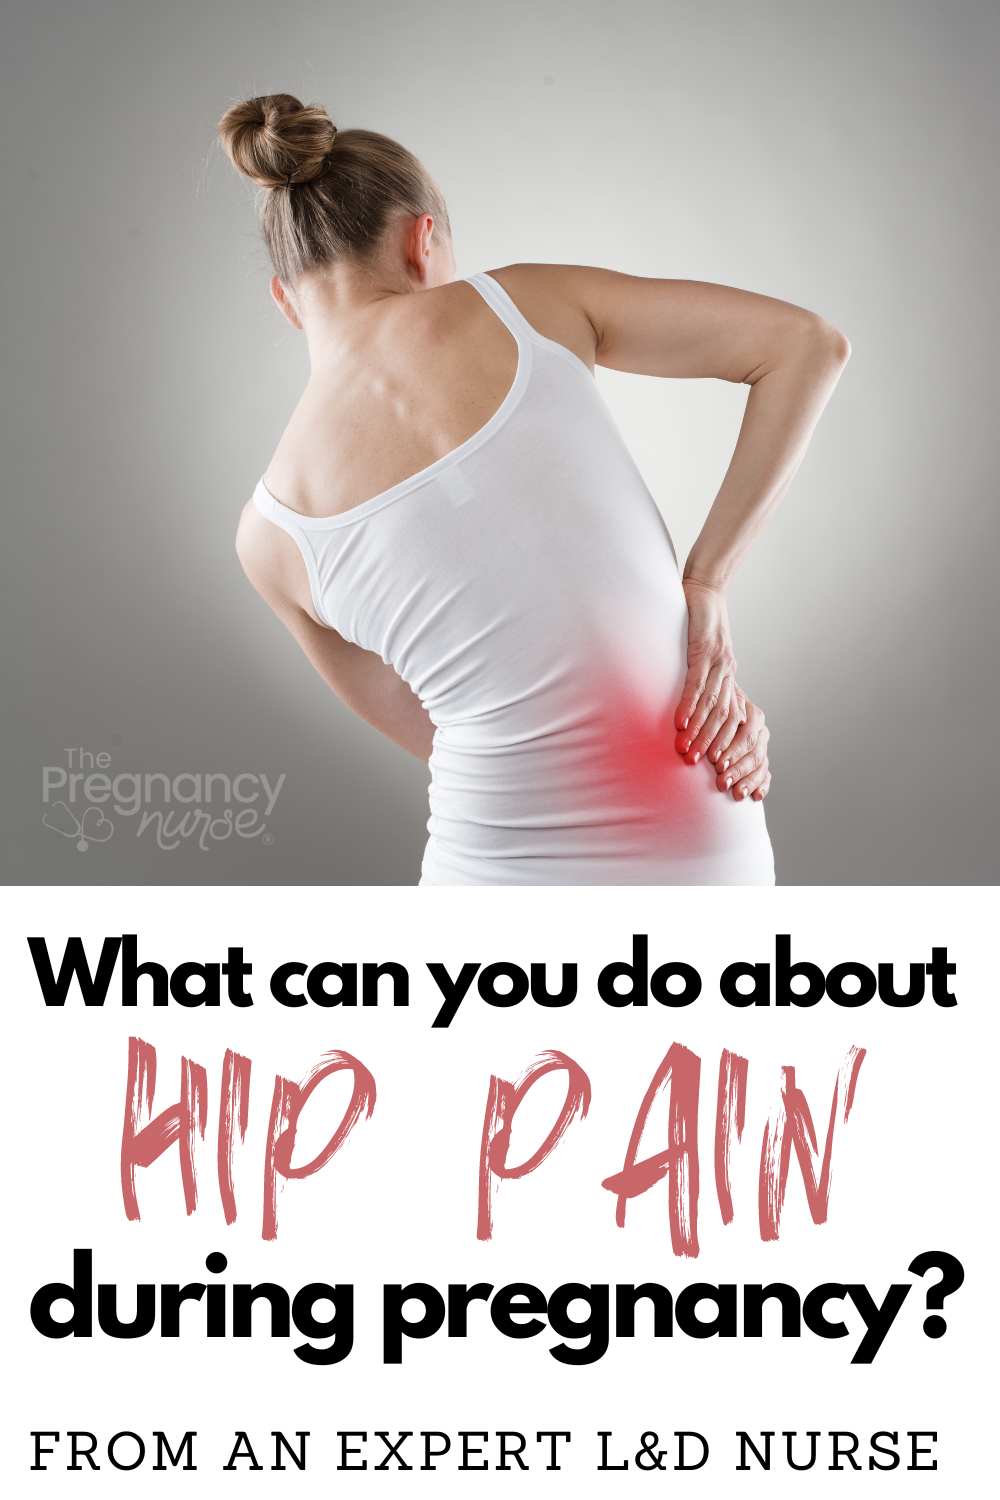 Tired of aching hip pain during pregnancy? Let me help! As an experienced nurse and mother, I've walked the same path and found relief. Explore my pin for practical tips and effective exercises to ease your hip pain naturally!